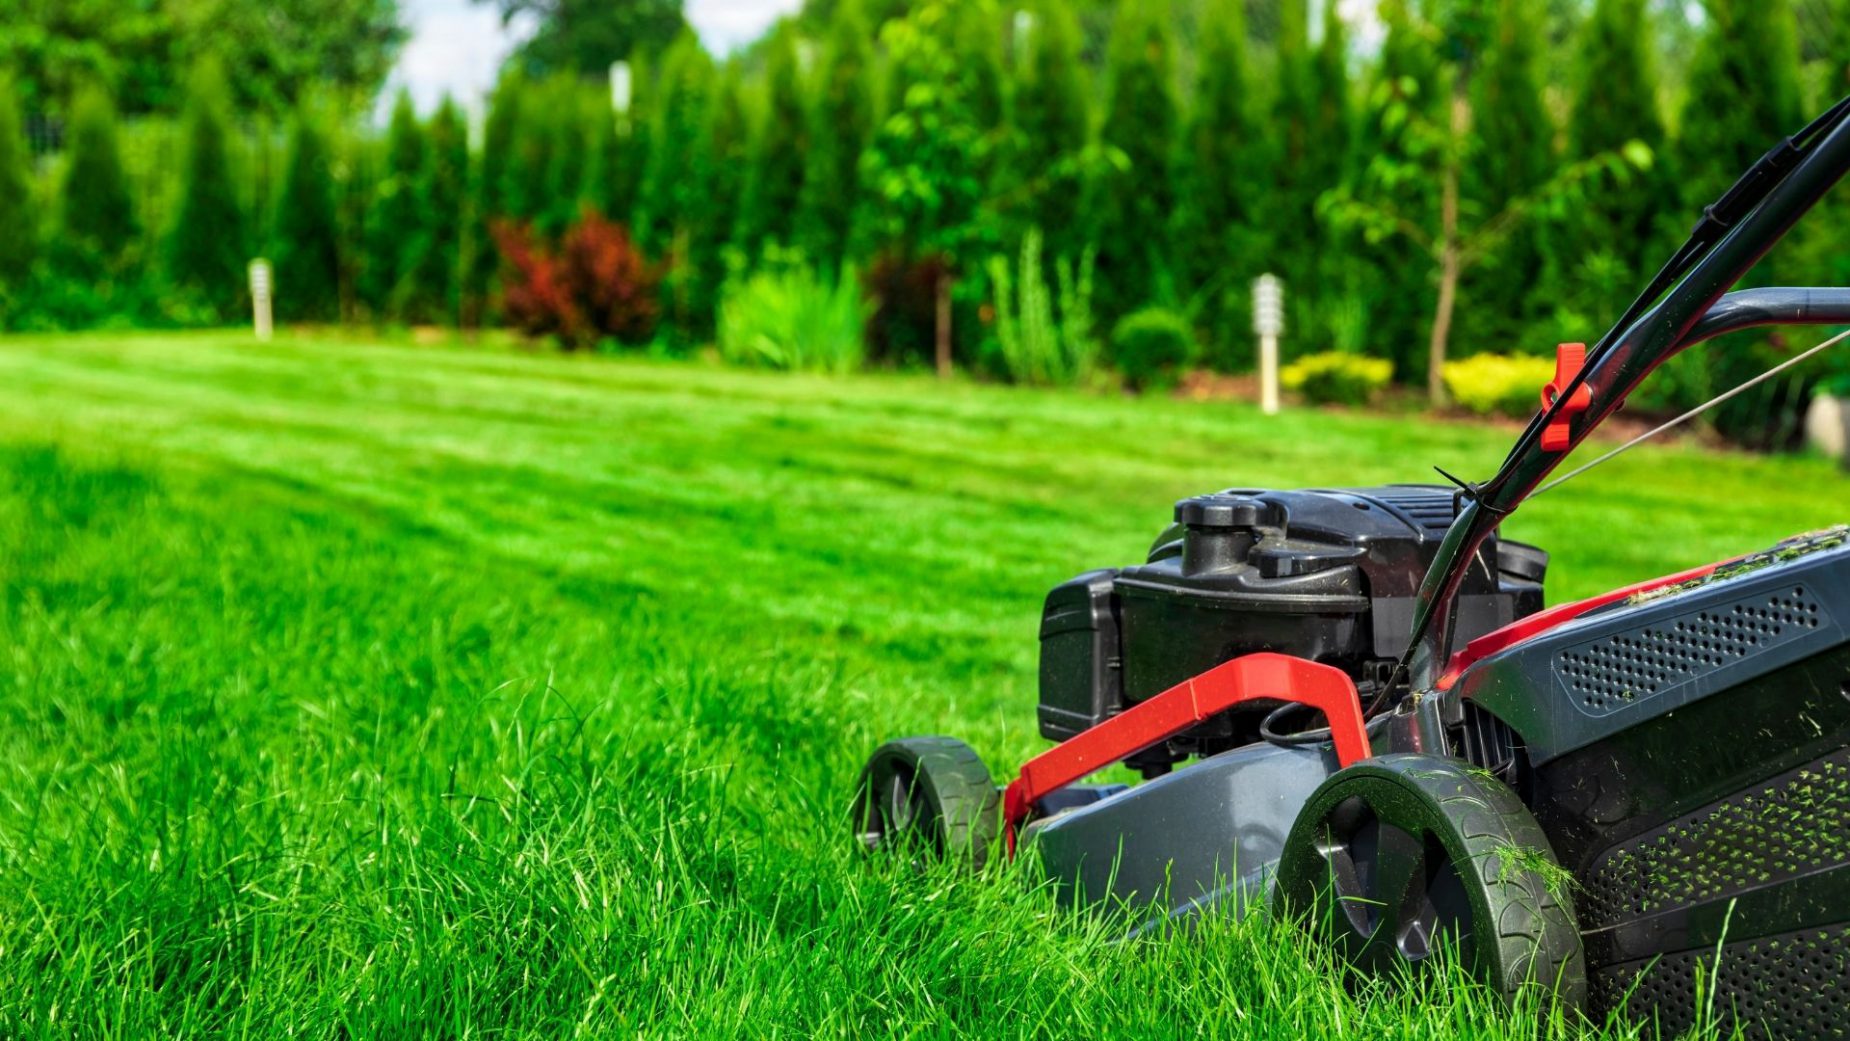 Lawn And Garden Tractor And Home Lawn And Garden Equipment Market